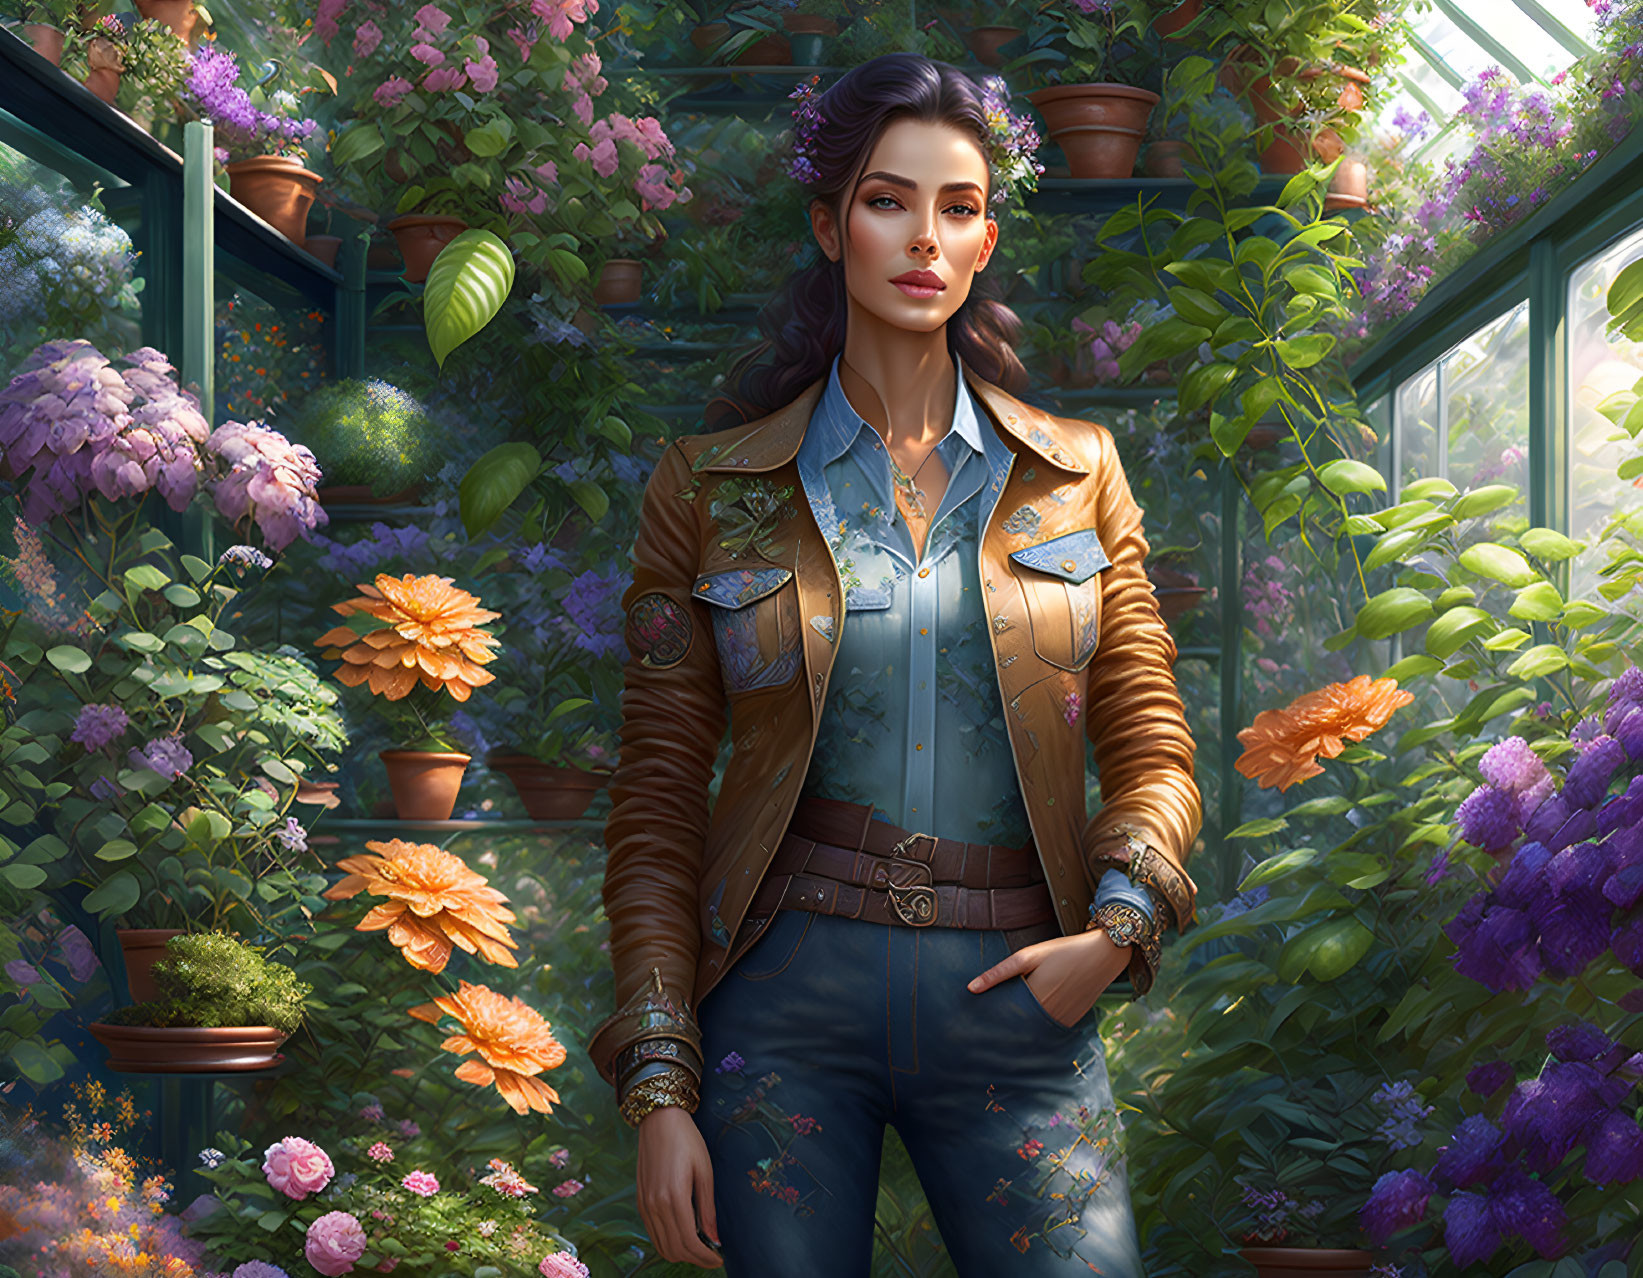 Woman in denim and leather jacket surrounded by flowers in a sunlit greenhouse